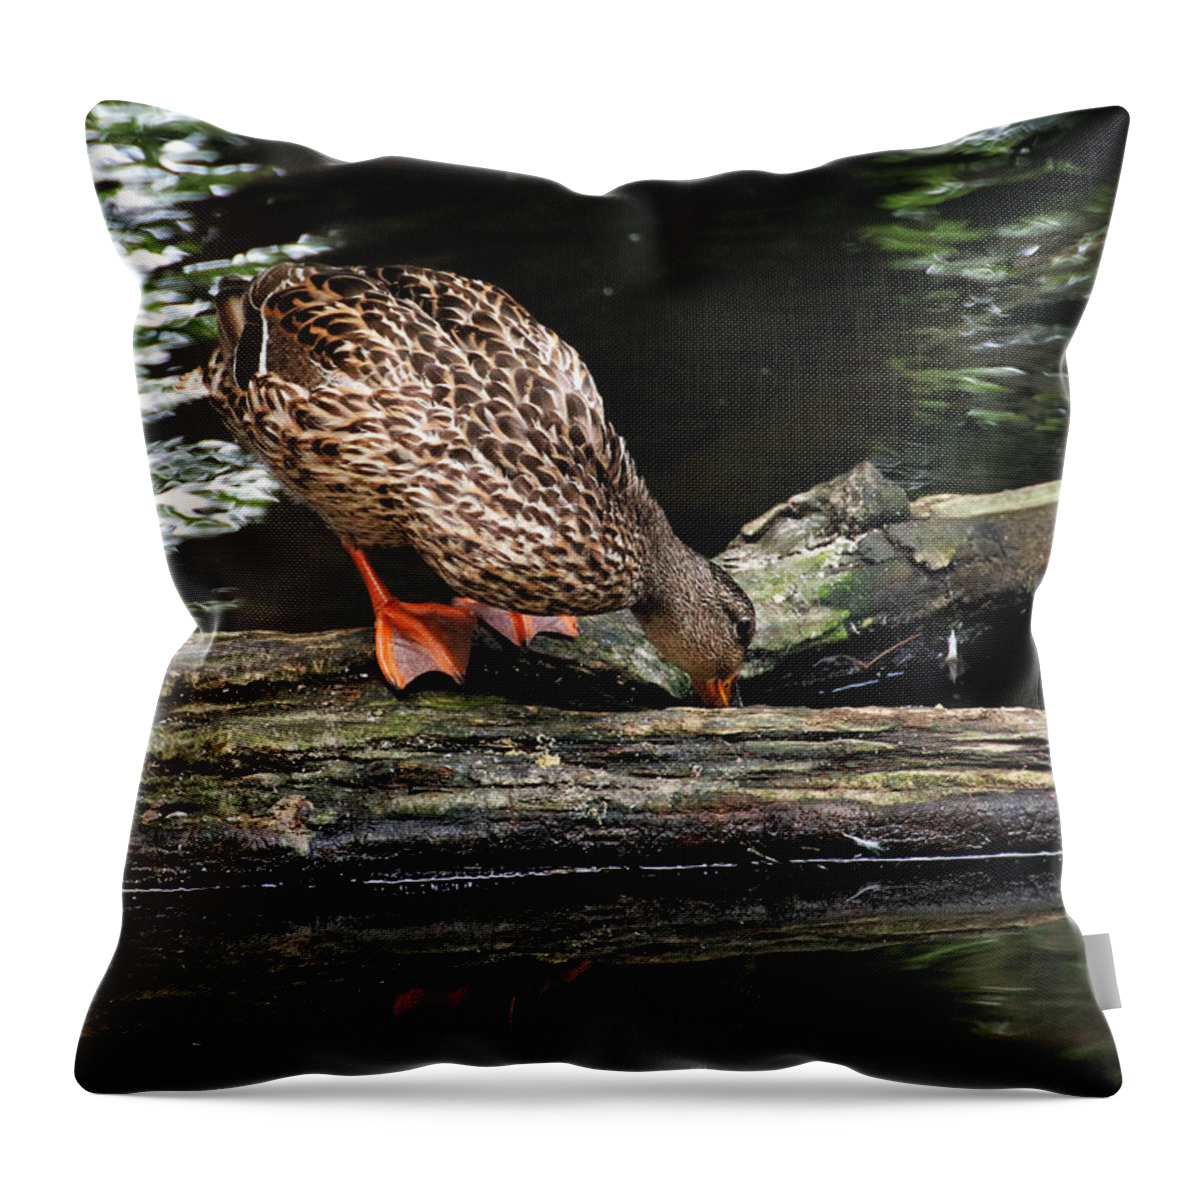 Wildlife Throw Pillow featuring the photograph Curious Duck by William Selander